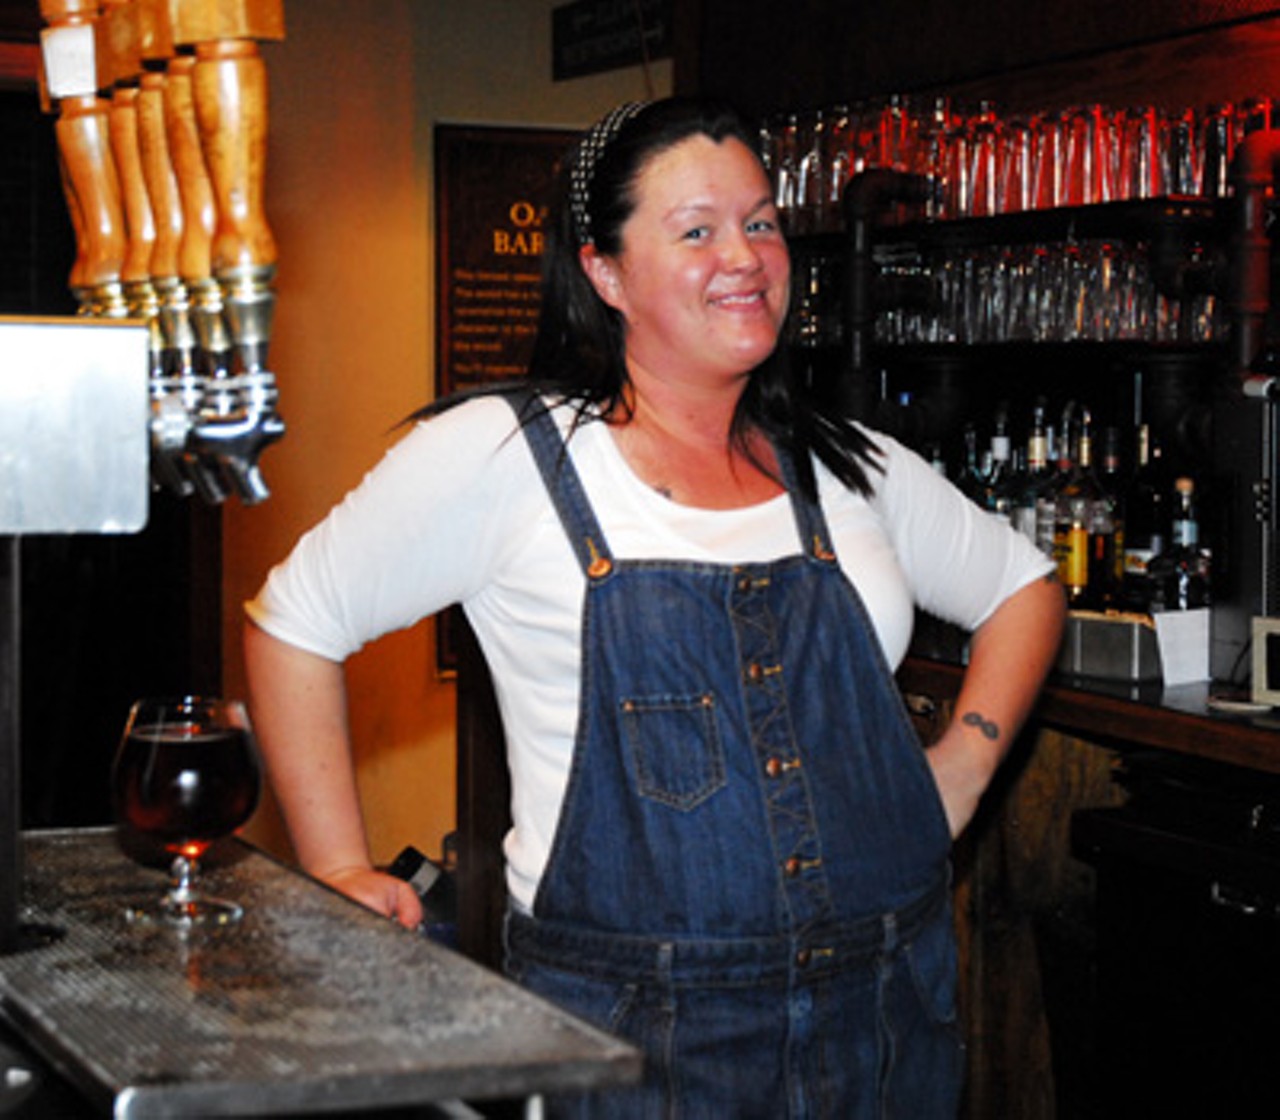 Brenda Smith was behind the bar on January 2 at the Schlafly Tap Room, serving guests and band members alike.